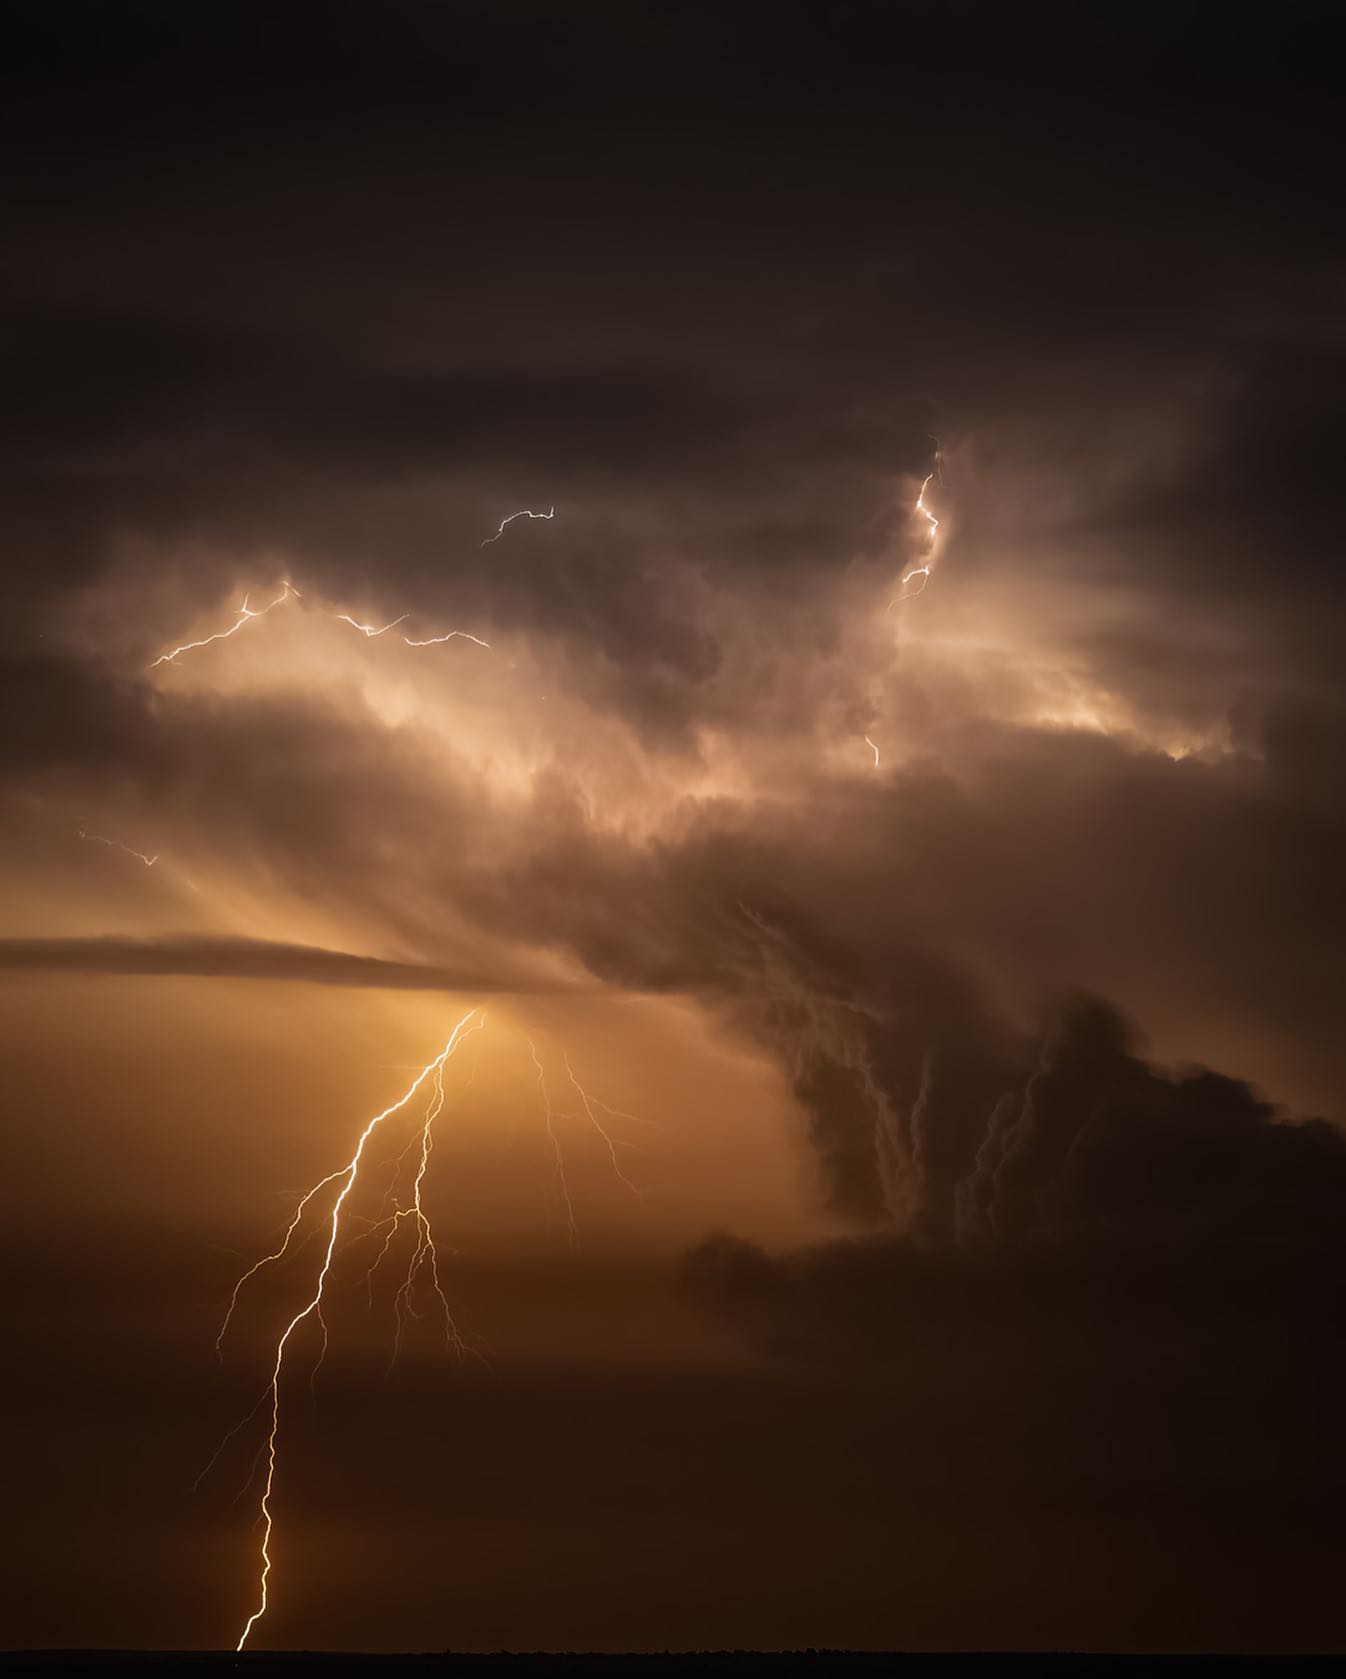 Storm chasing for fun and photographs – Houston Public Media